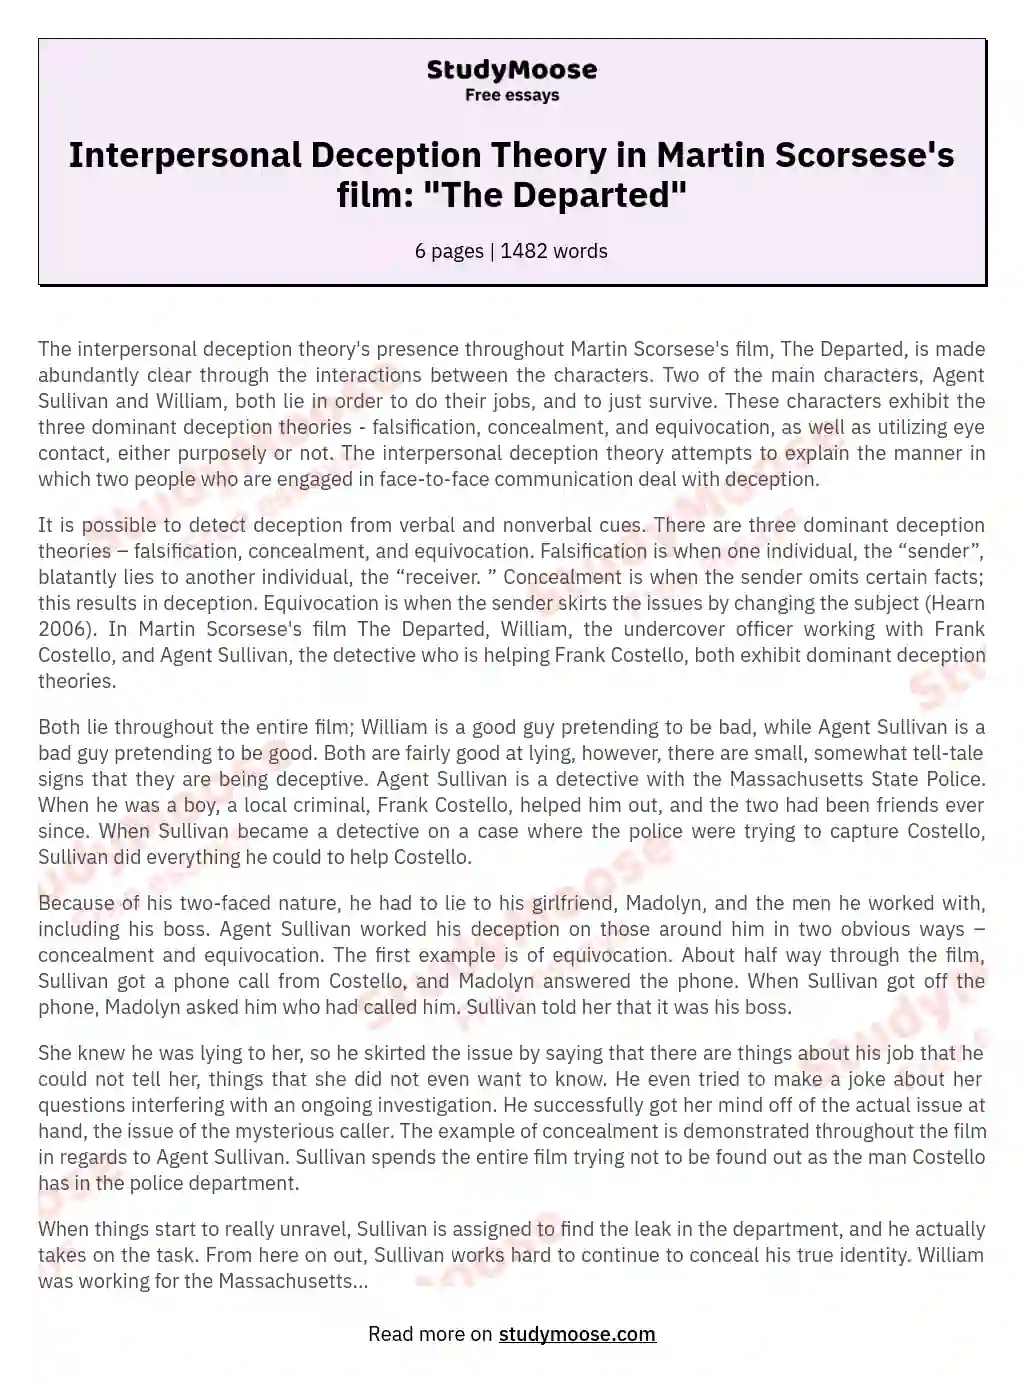 Interpersonal Deception Theory in Martin Scorsese's film: "The Departed"